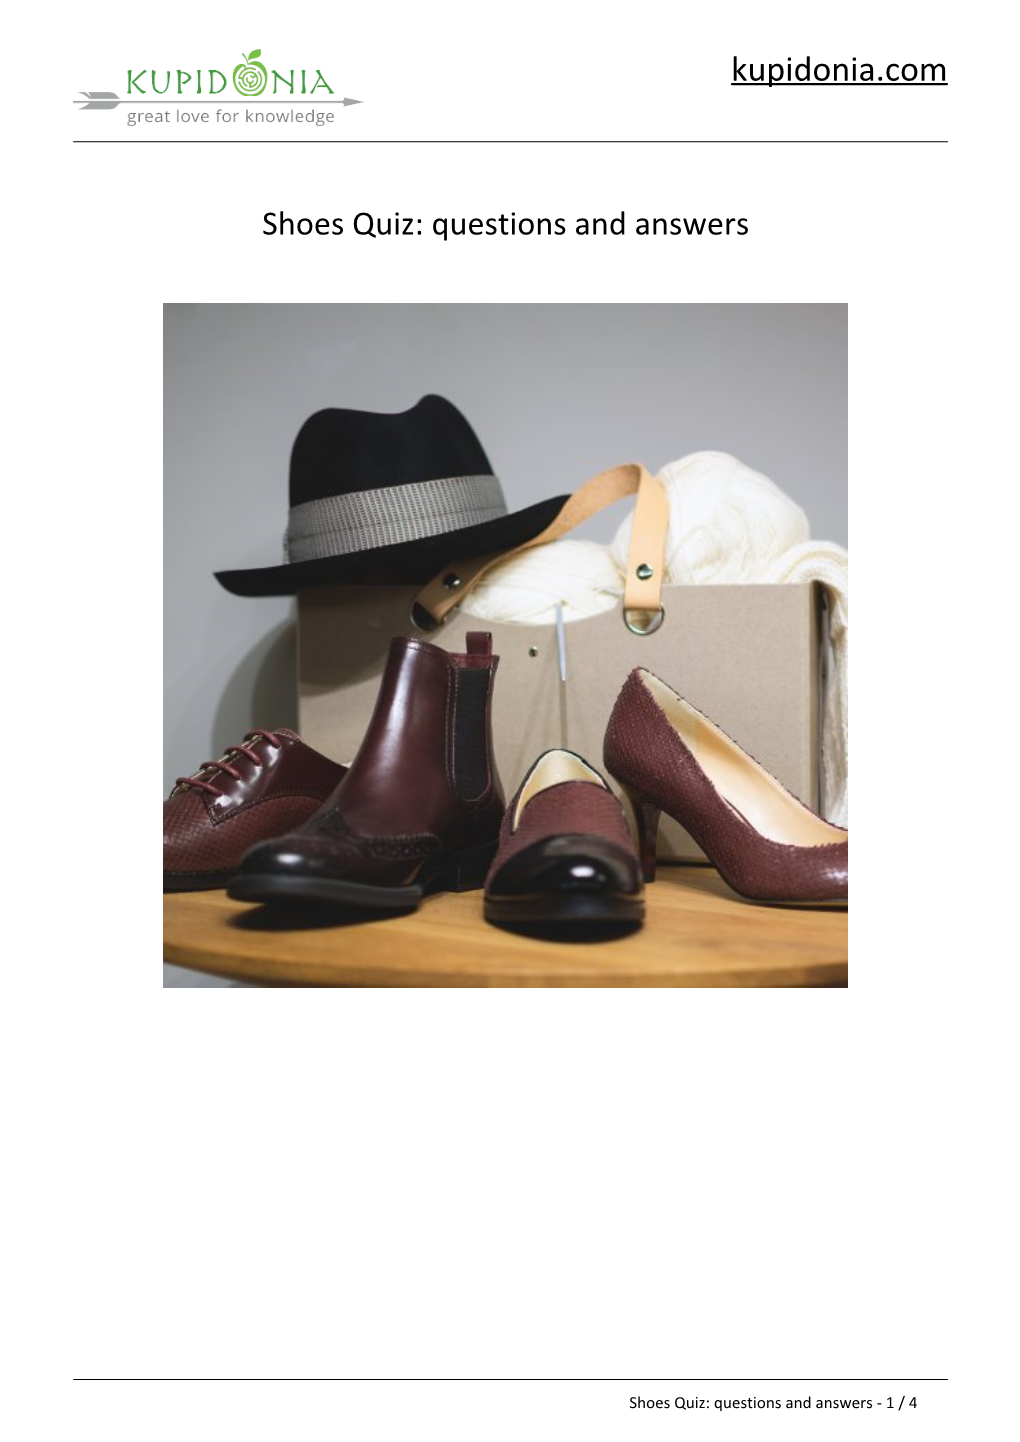 Shoes Quiz: Questions and Answers